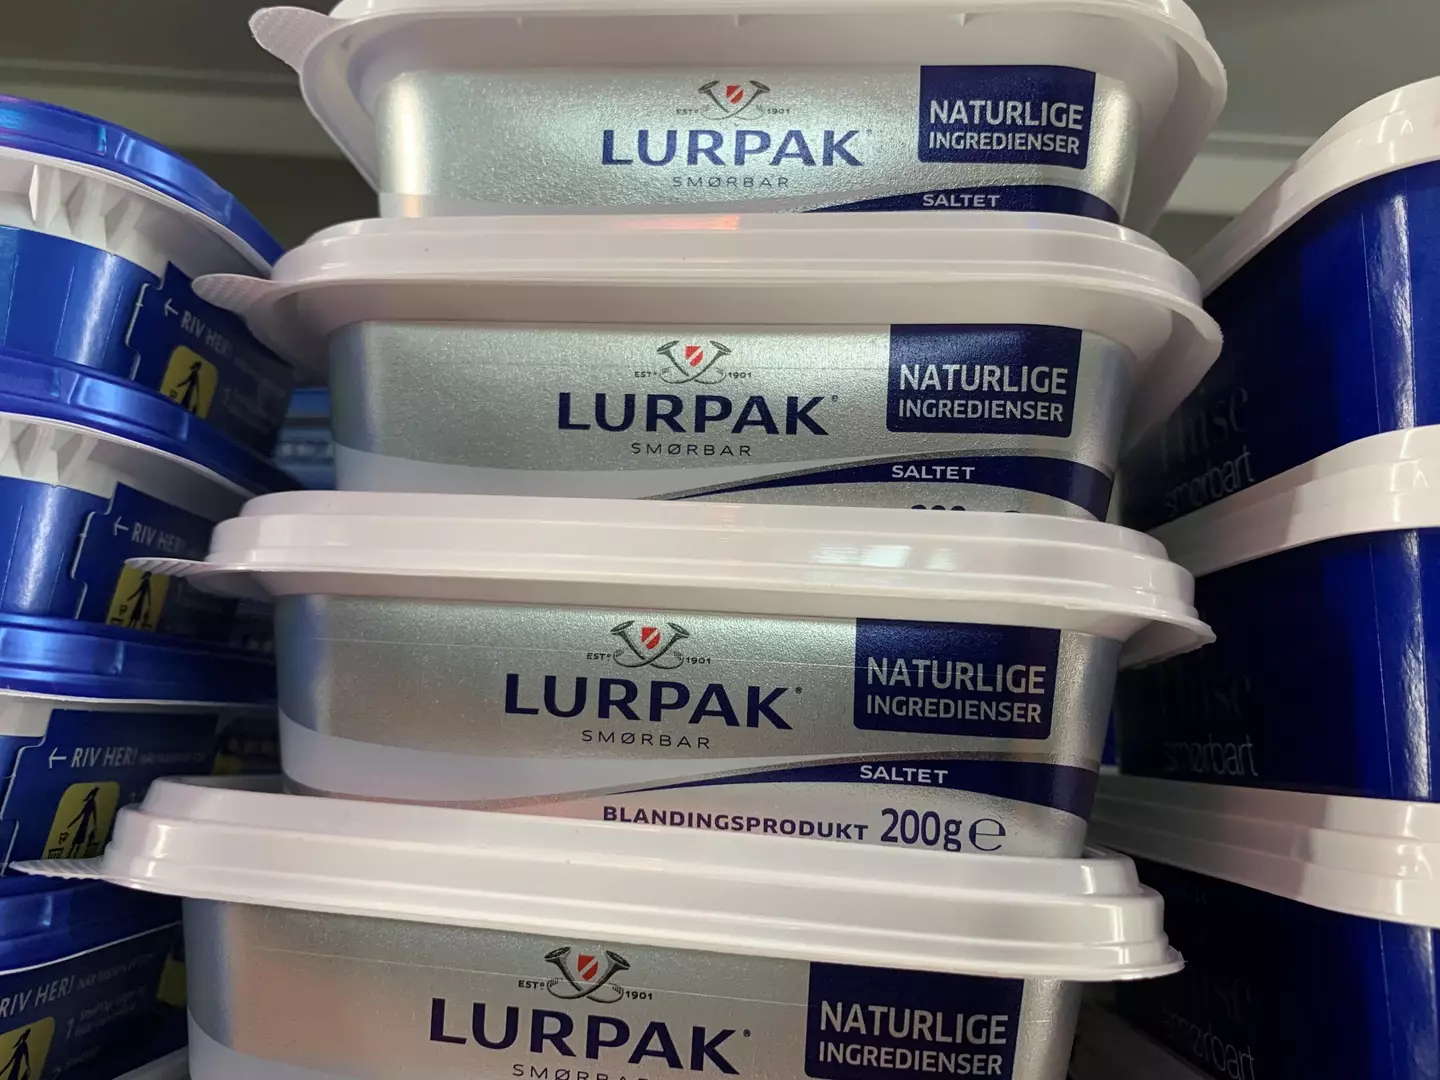 The Danish butter brand has hit what appears to be an all-time high price.